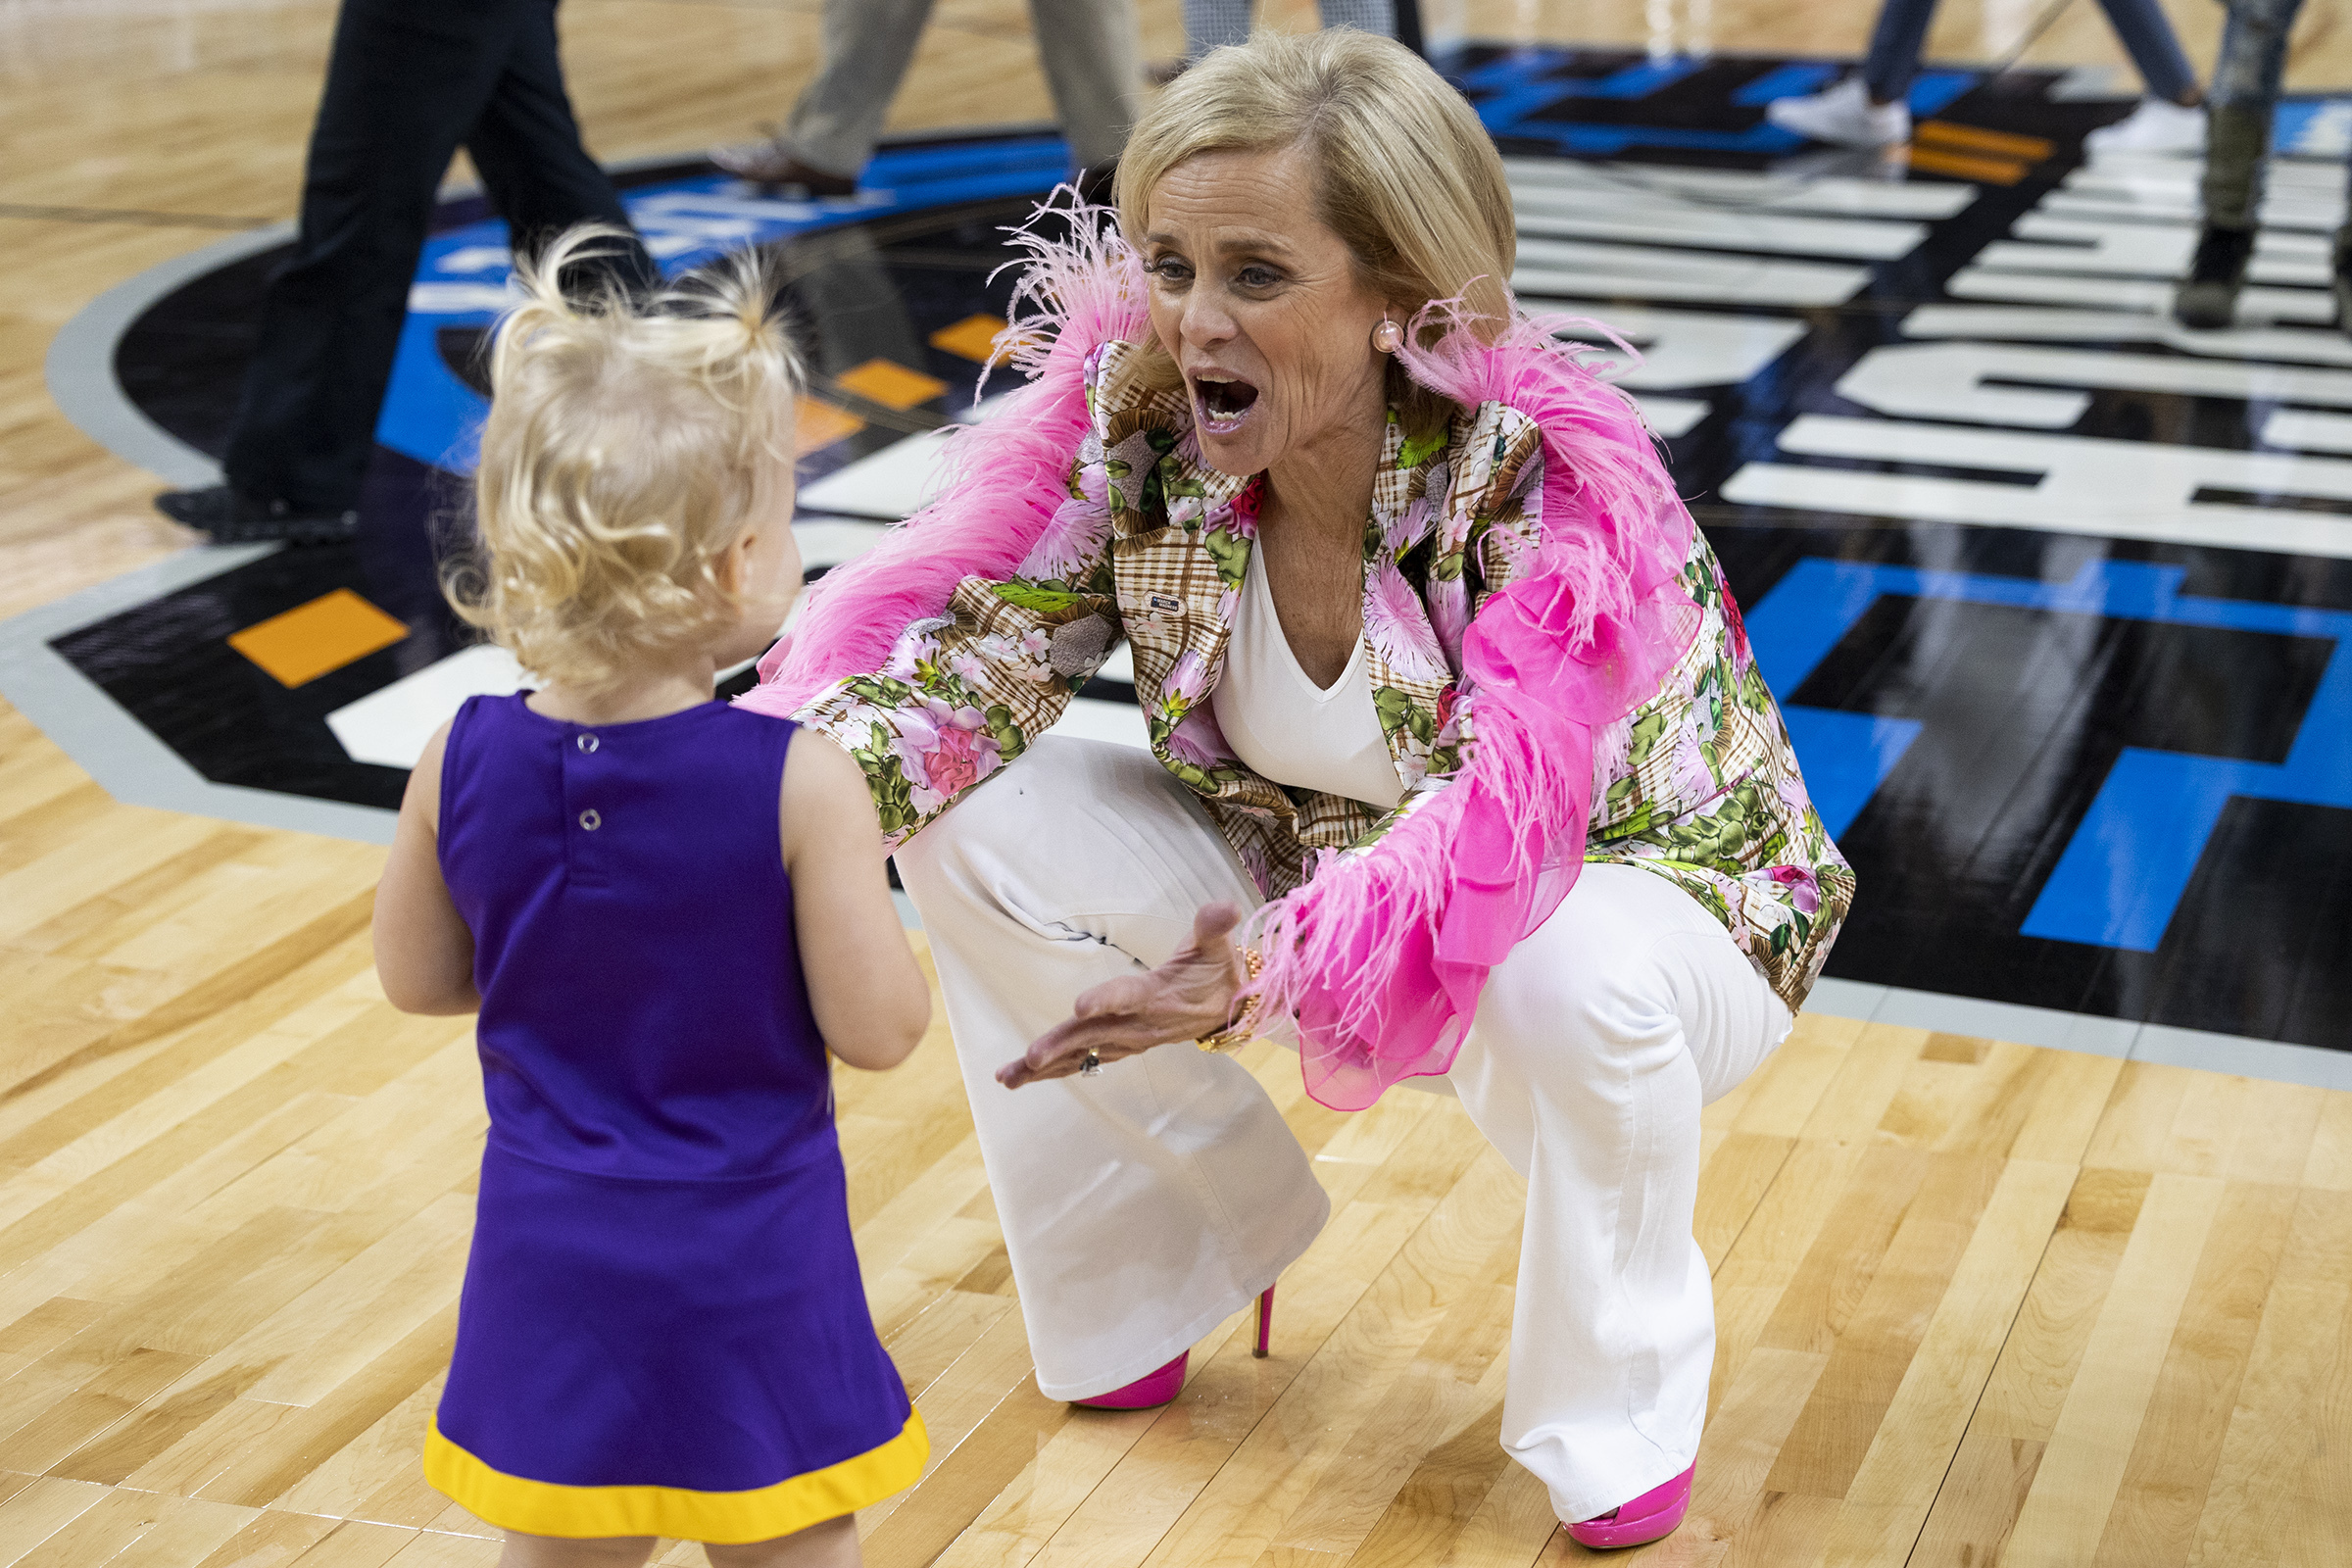 Kim Mulkey outfit: What LSU coach wore vs Rice in NCAA Women's Tournament